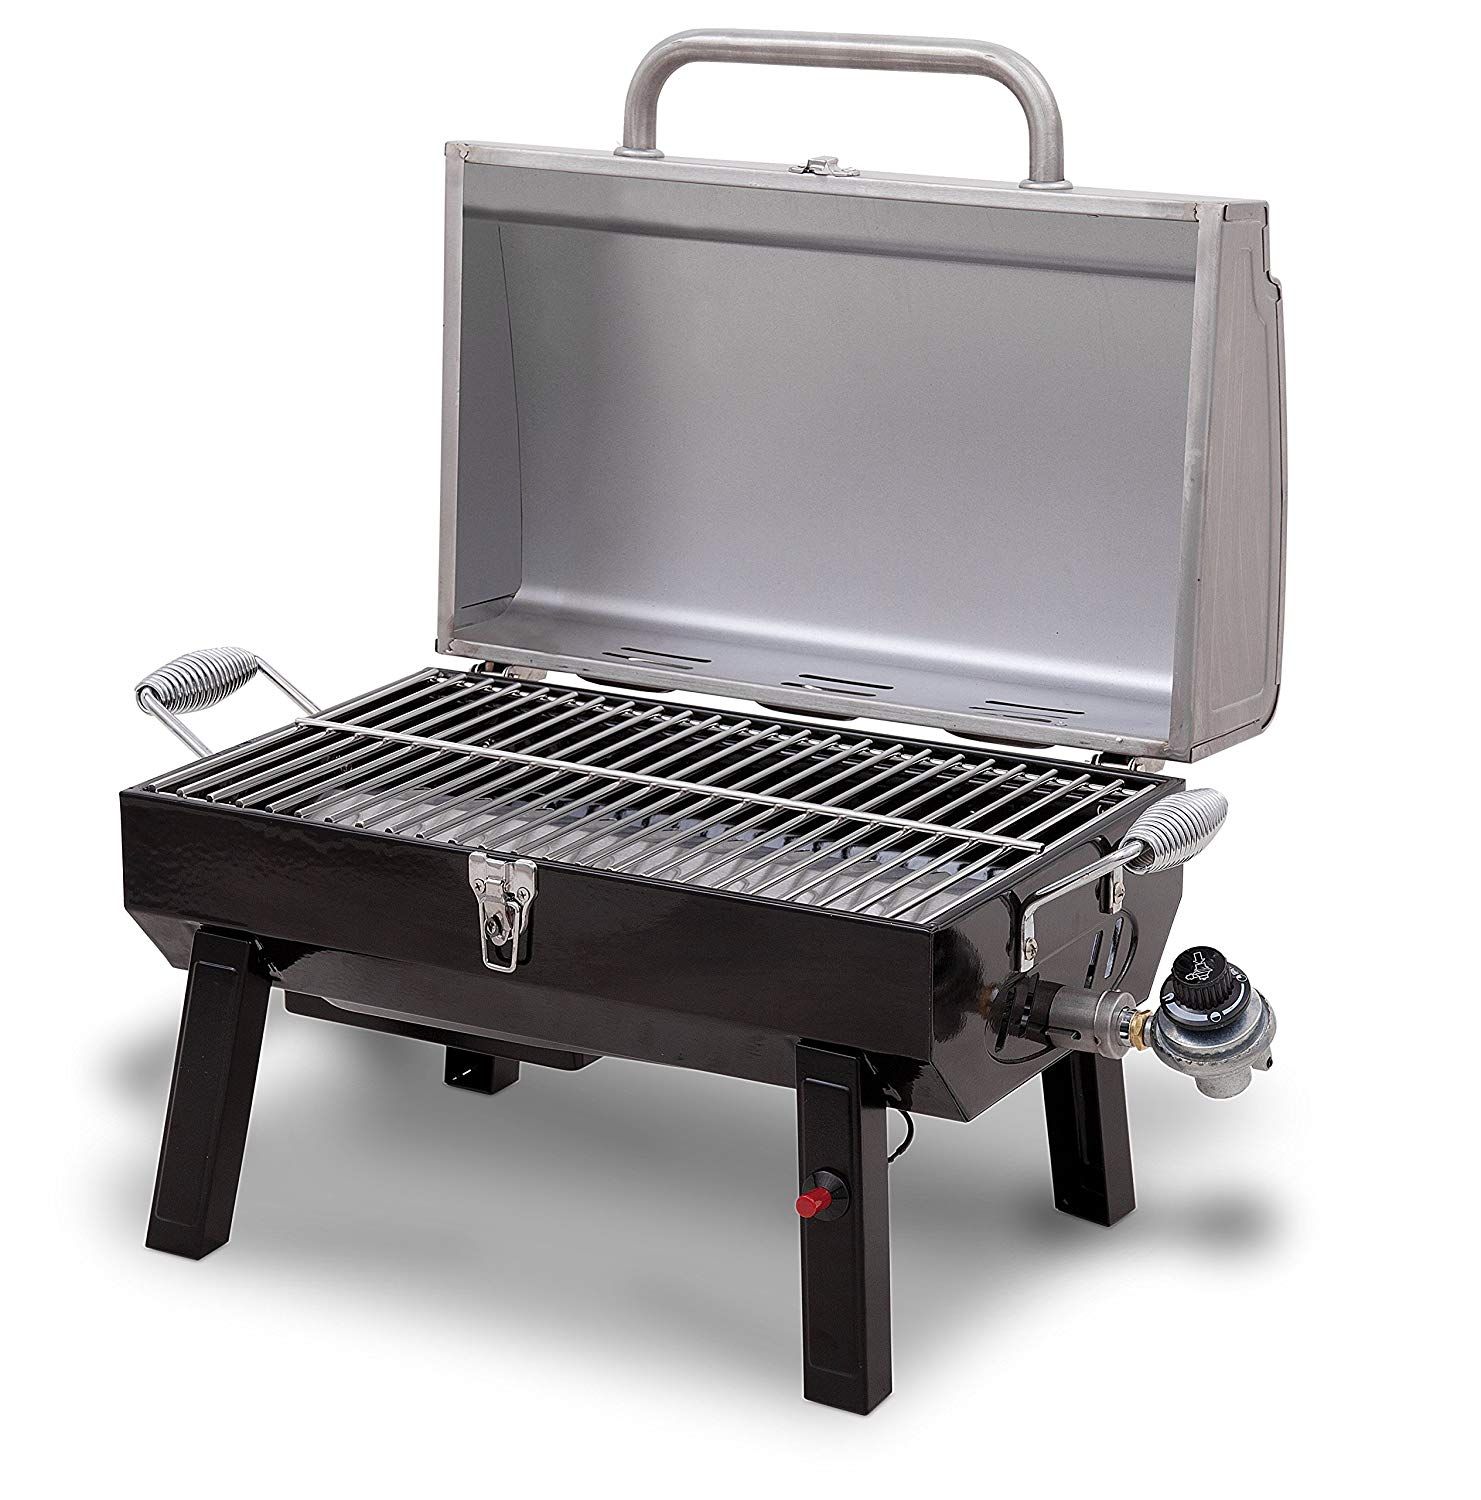 Pedestal Gas Grill - Buy Electric, Charcoal and Propane Grills At Best Prices